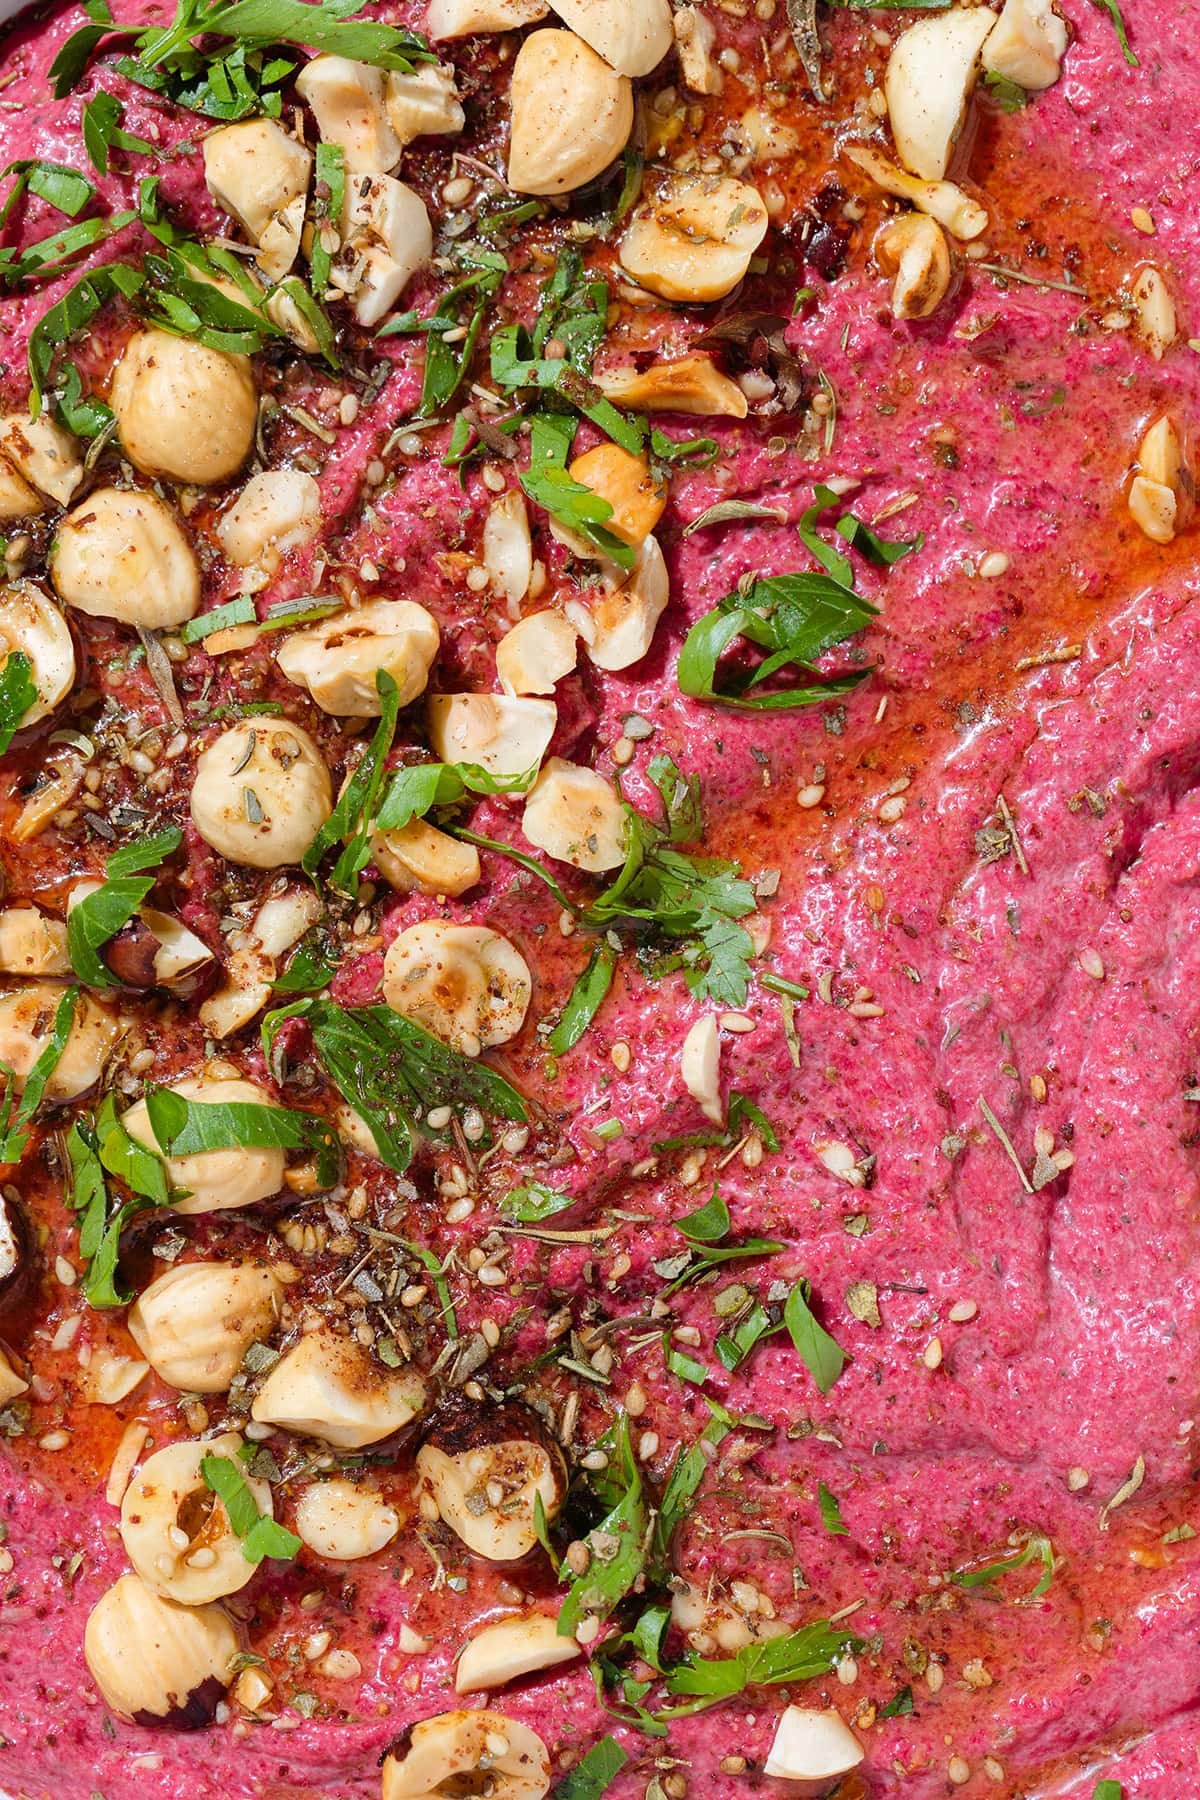 Bright pink beet dip in a white bowl with a blue rim garnished with hazelnuts, parsley, and olive oil.